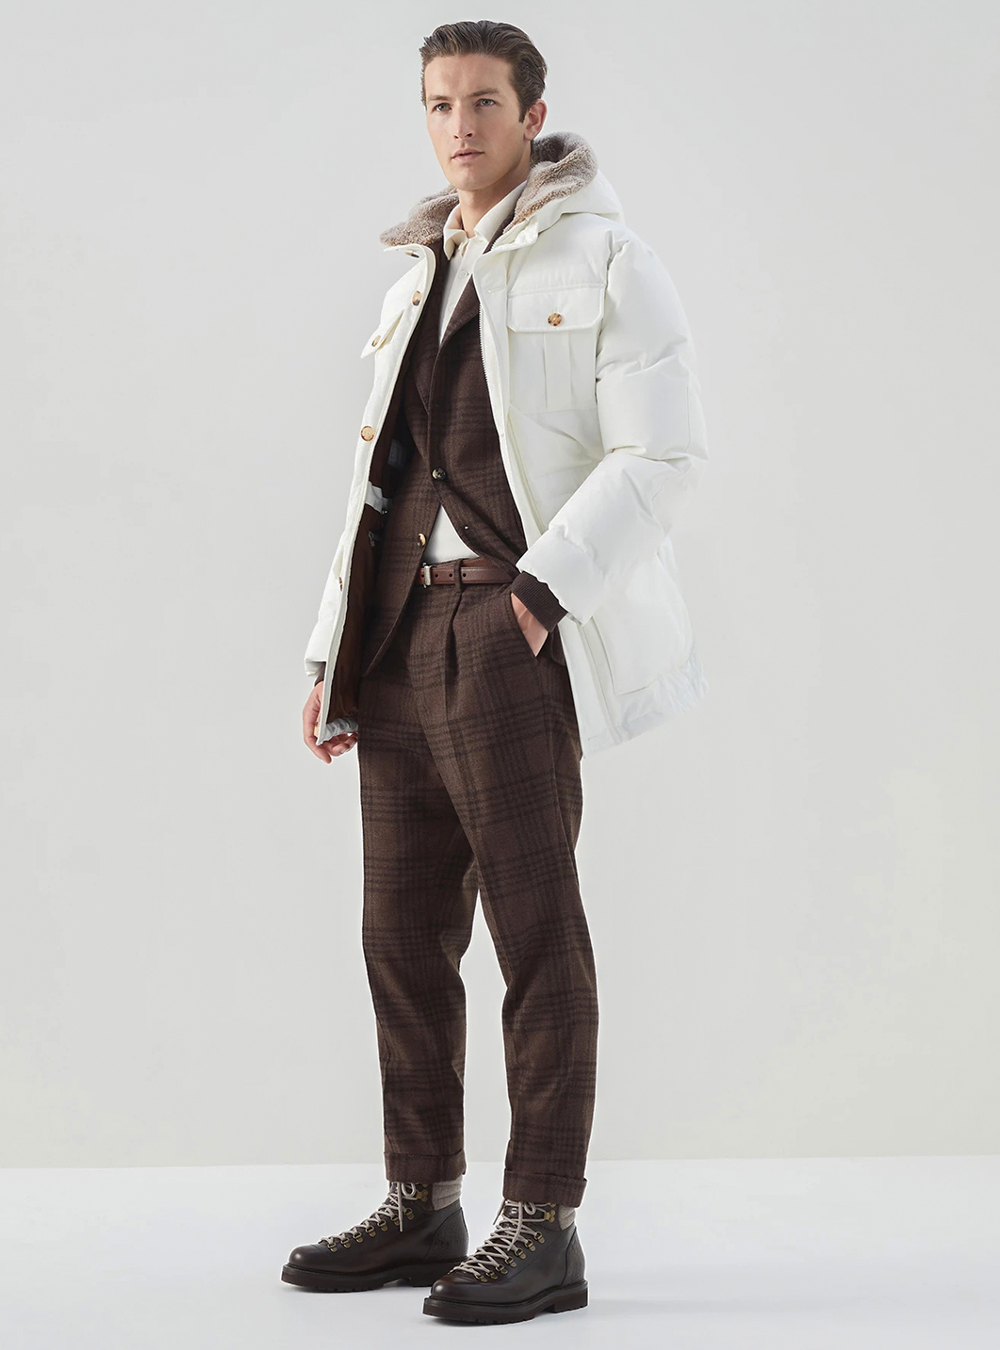 white parka, brown plaid suit, off-white polo shirt, and dark brown boots